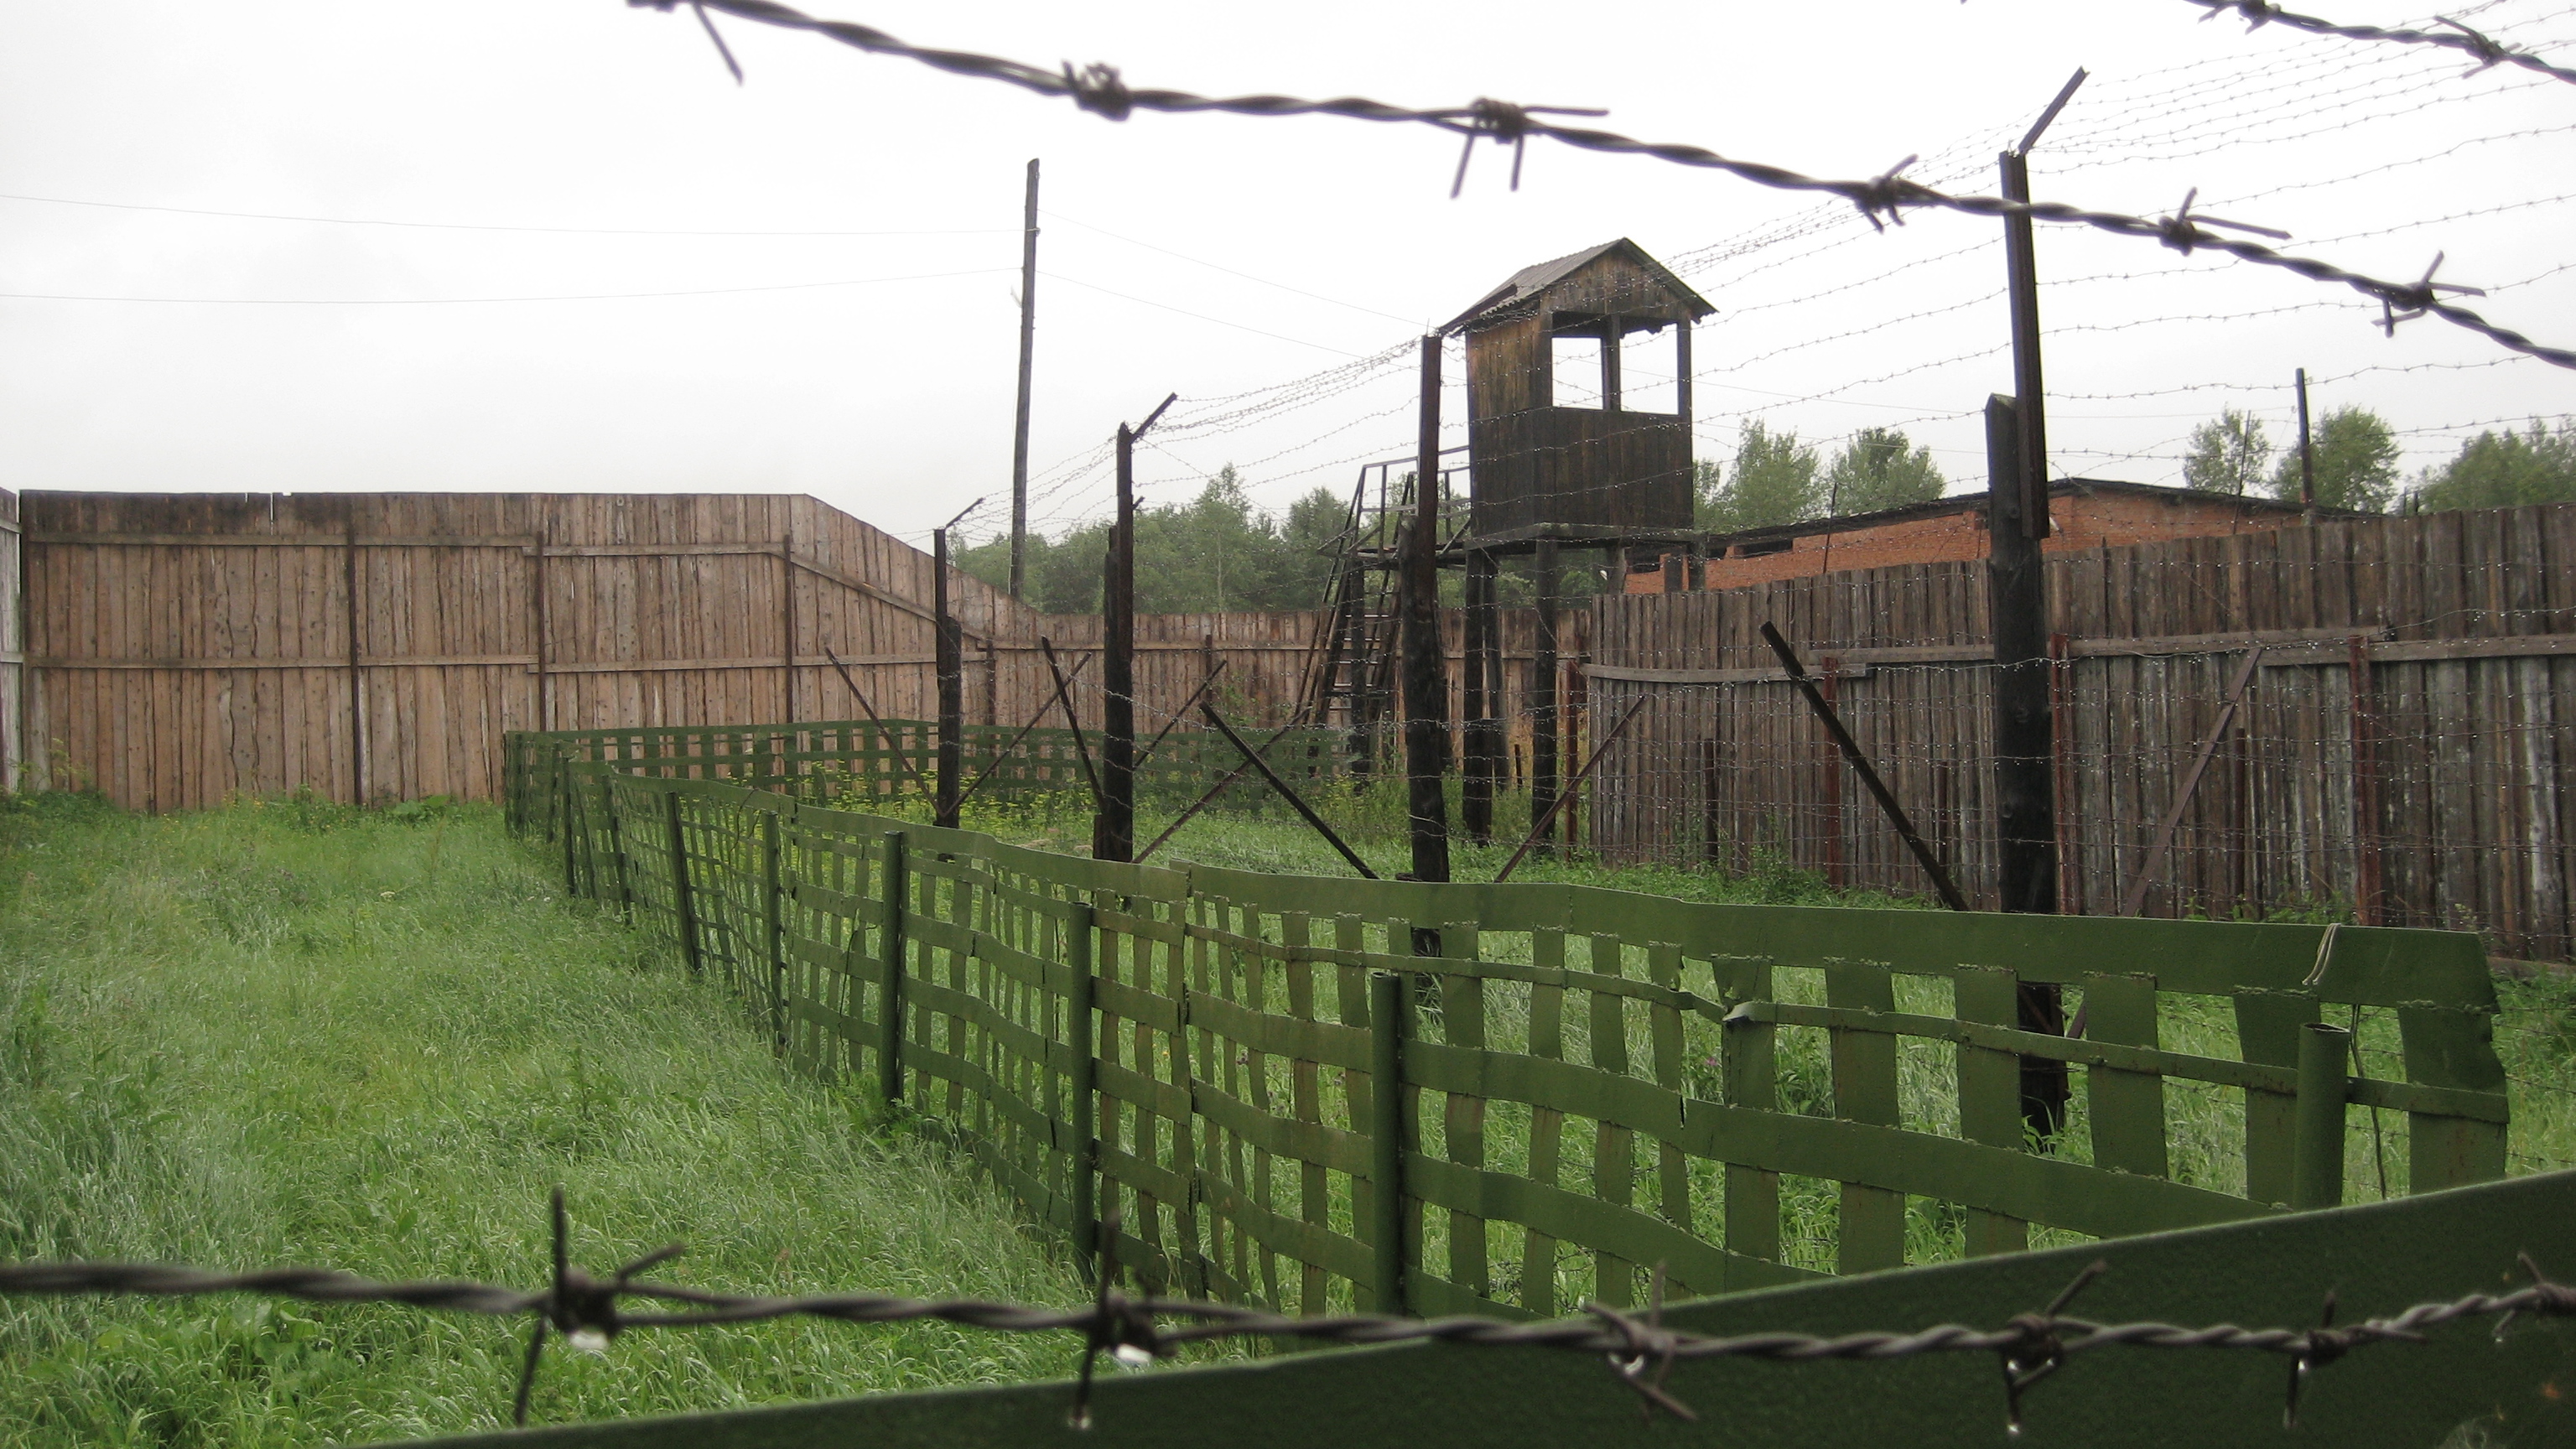 The_fence_at_the_old_GULag_in_Perm-36.JPG